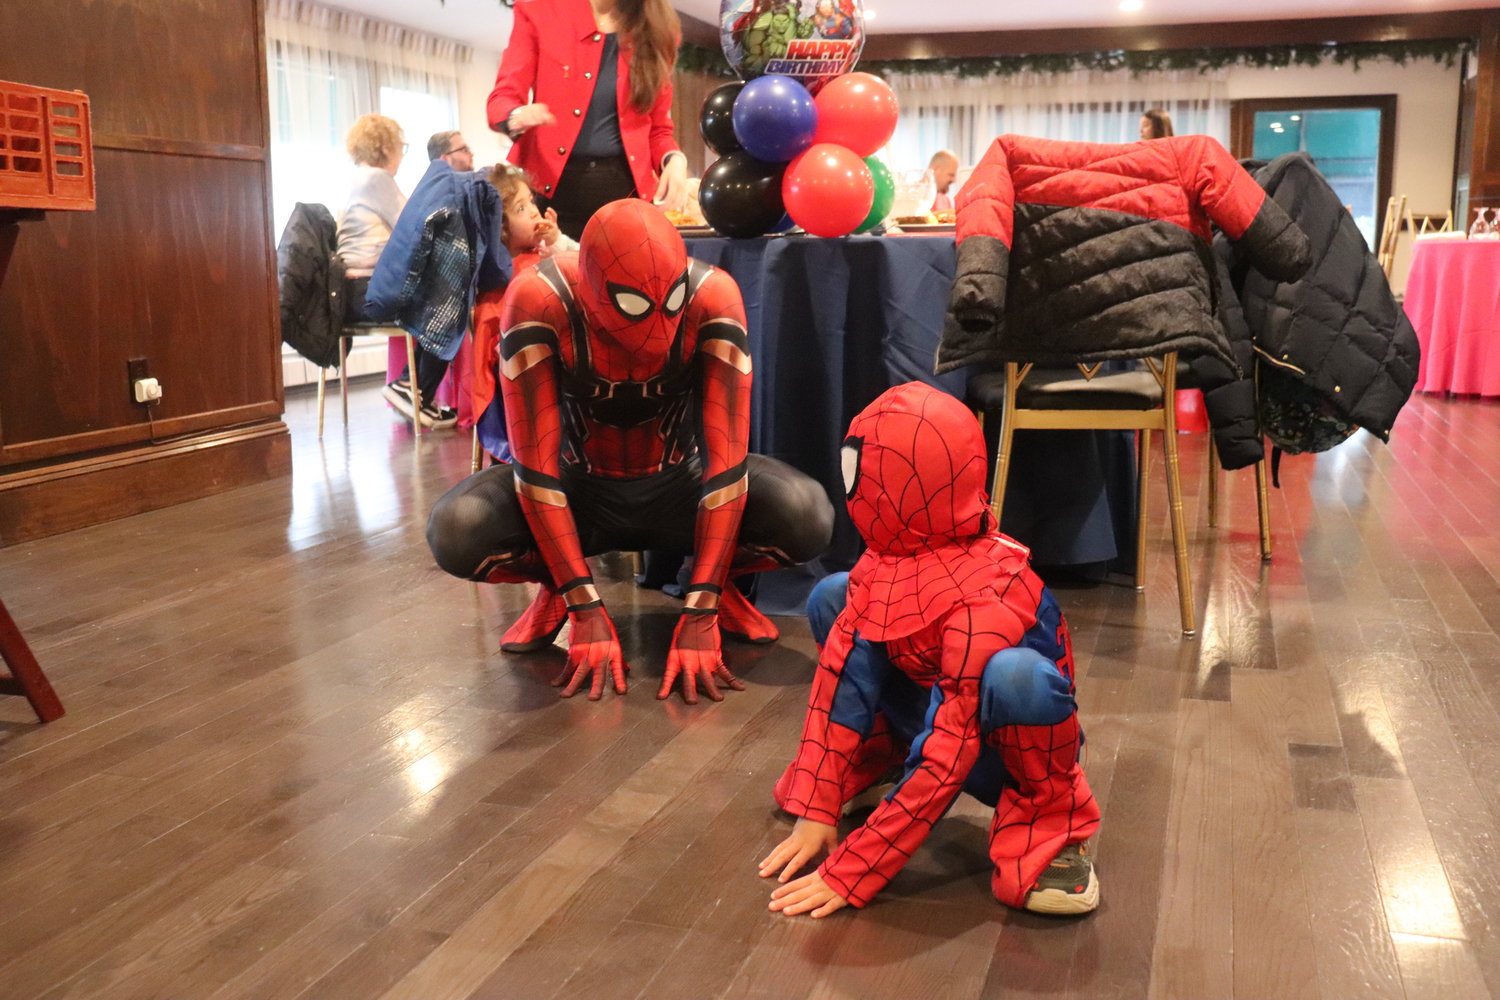 Spider-Man finds a new apprentice at the Milleridge Inn.